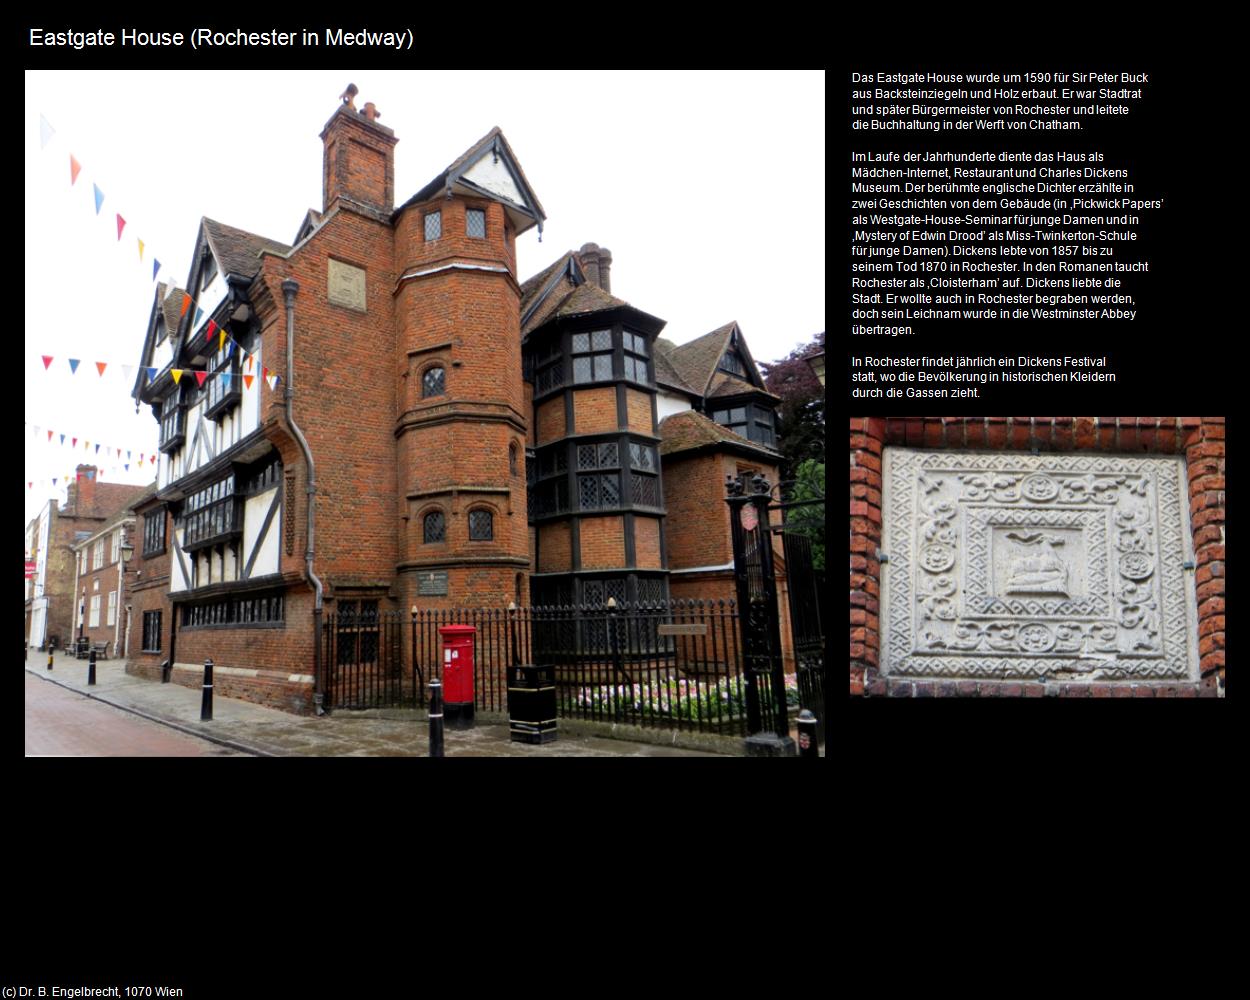 Eastgate House (Rochester in Medway, England) in Kulturatlas-ENGLAND und WALES